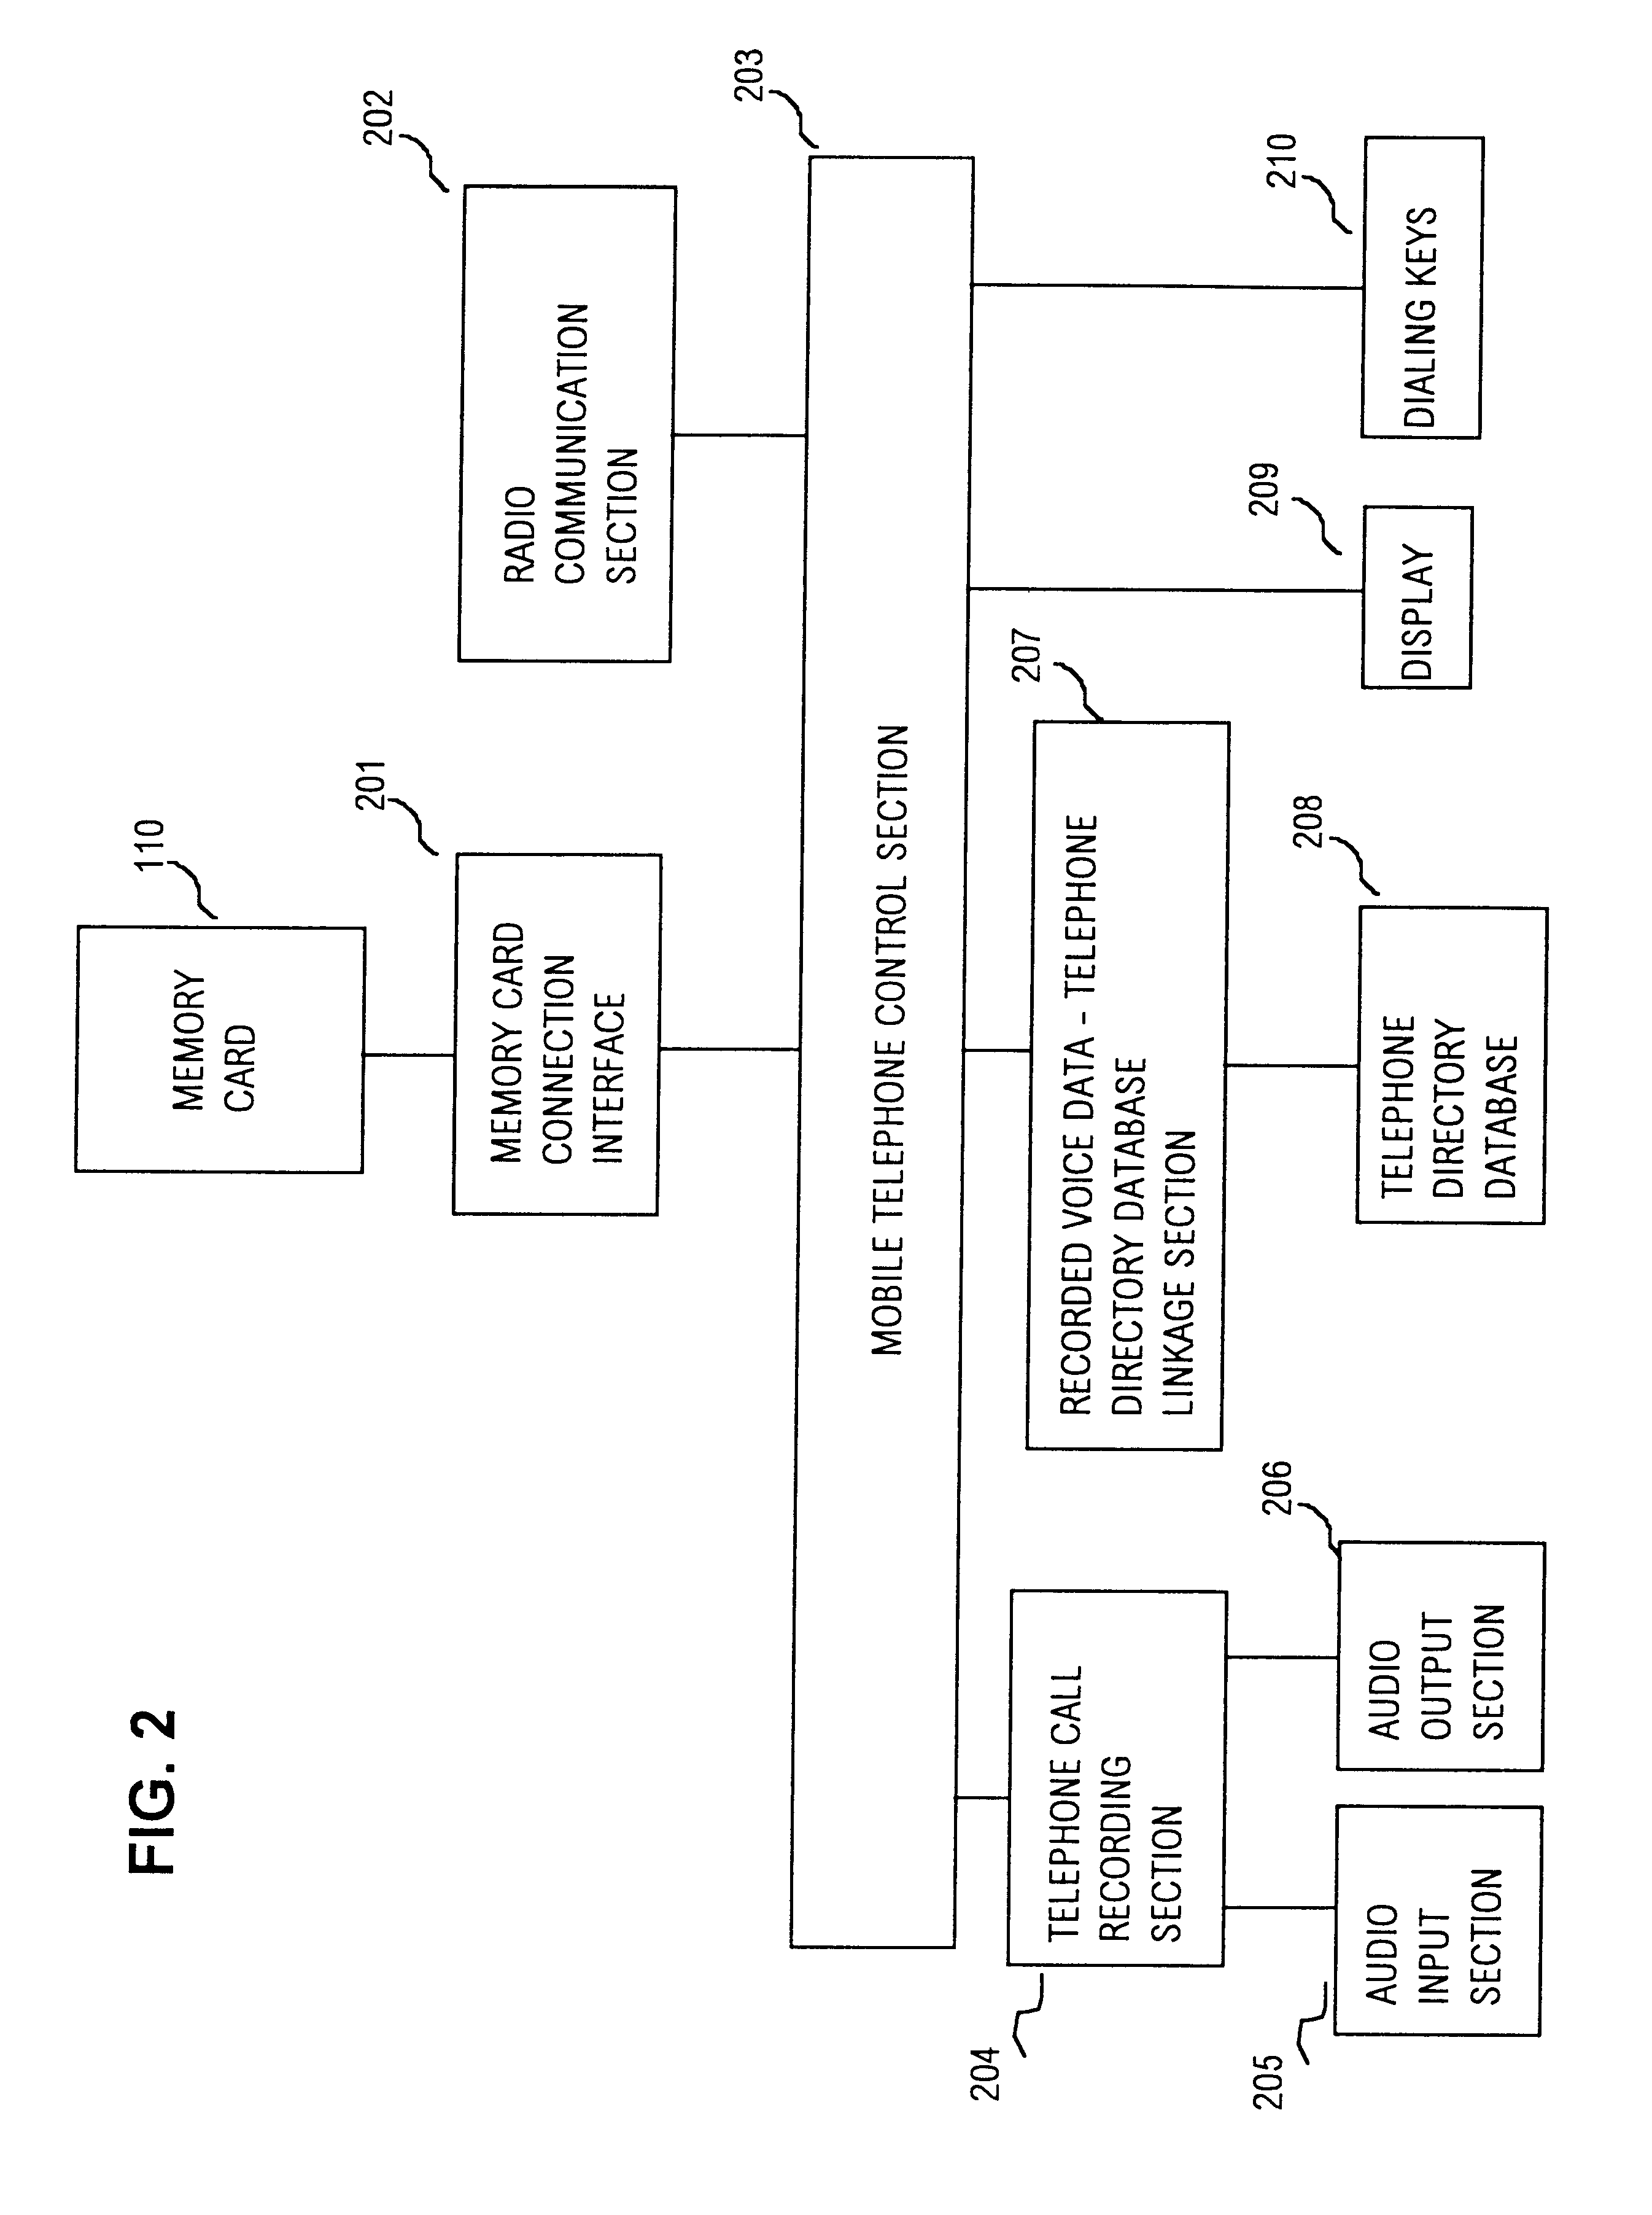 Data recording system for storing as data the contents of telephone calls made by internal telephones and by mobile telephones having memory card data storage function